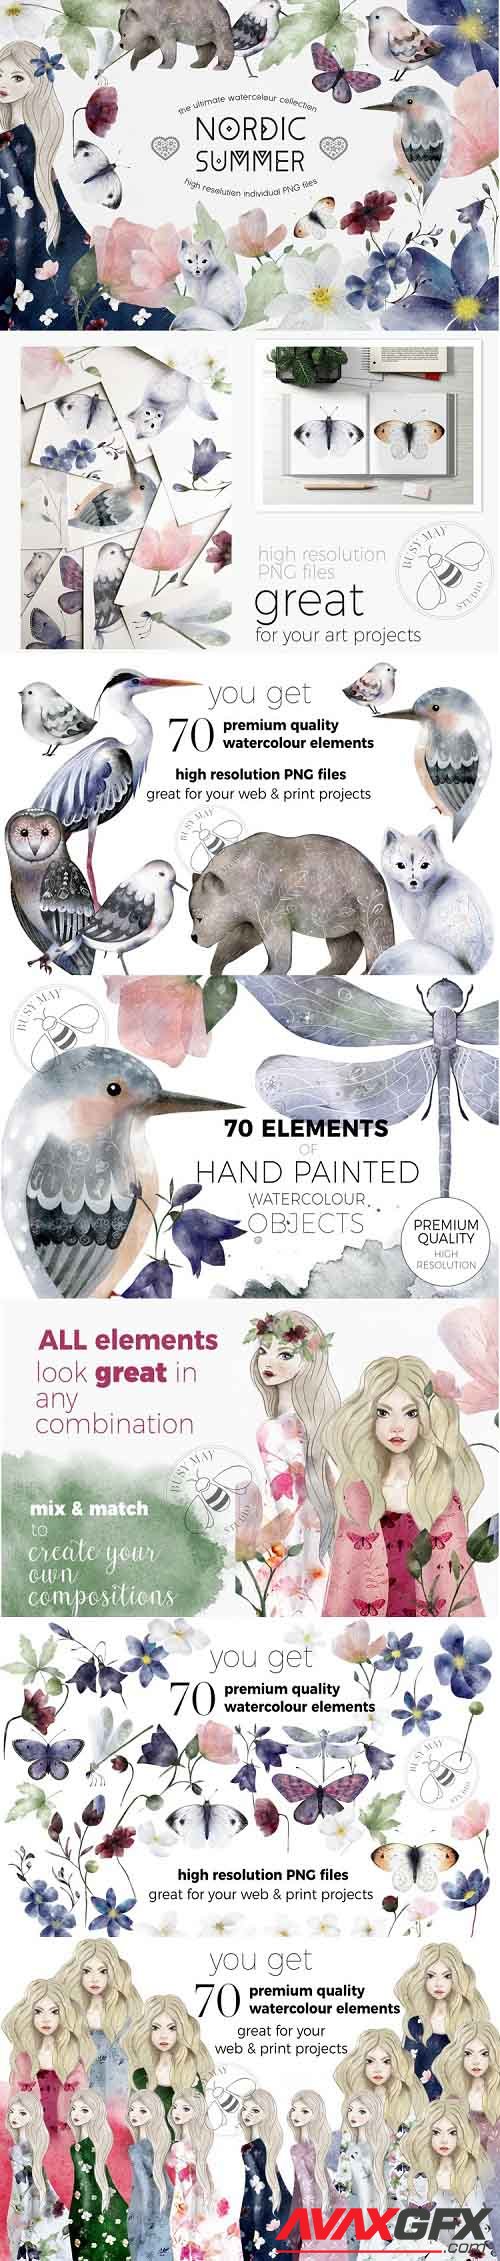 Nordic Summer Ultimate Collection Watercolor Animals Florals - 1022907